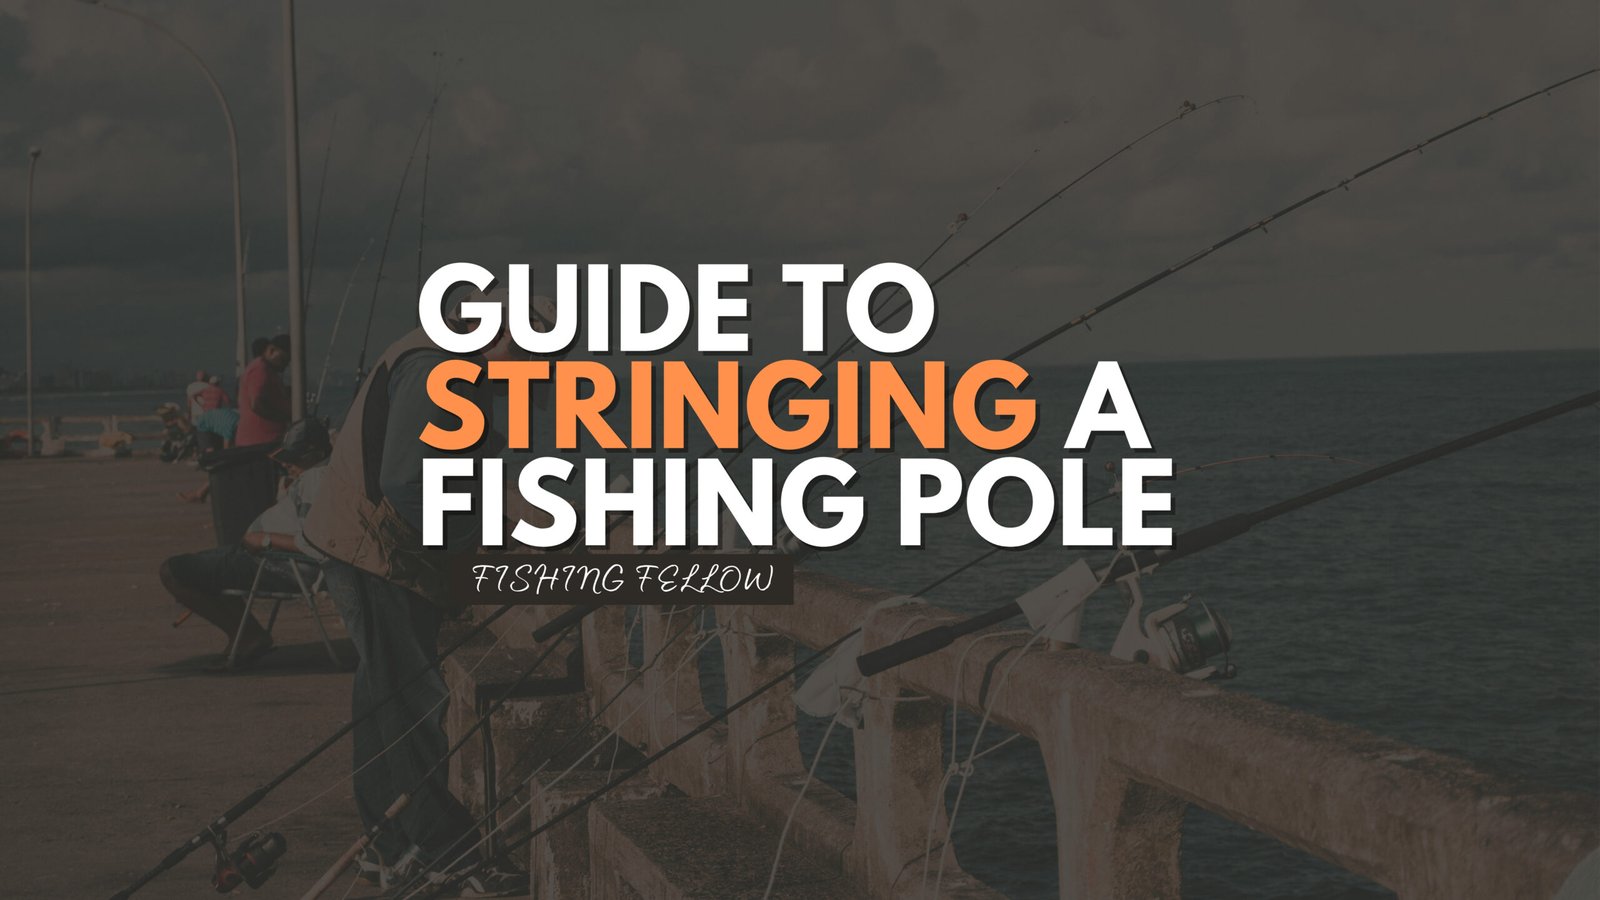 Guide to Stringing a Fishing Pole